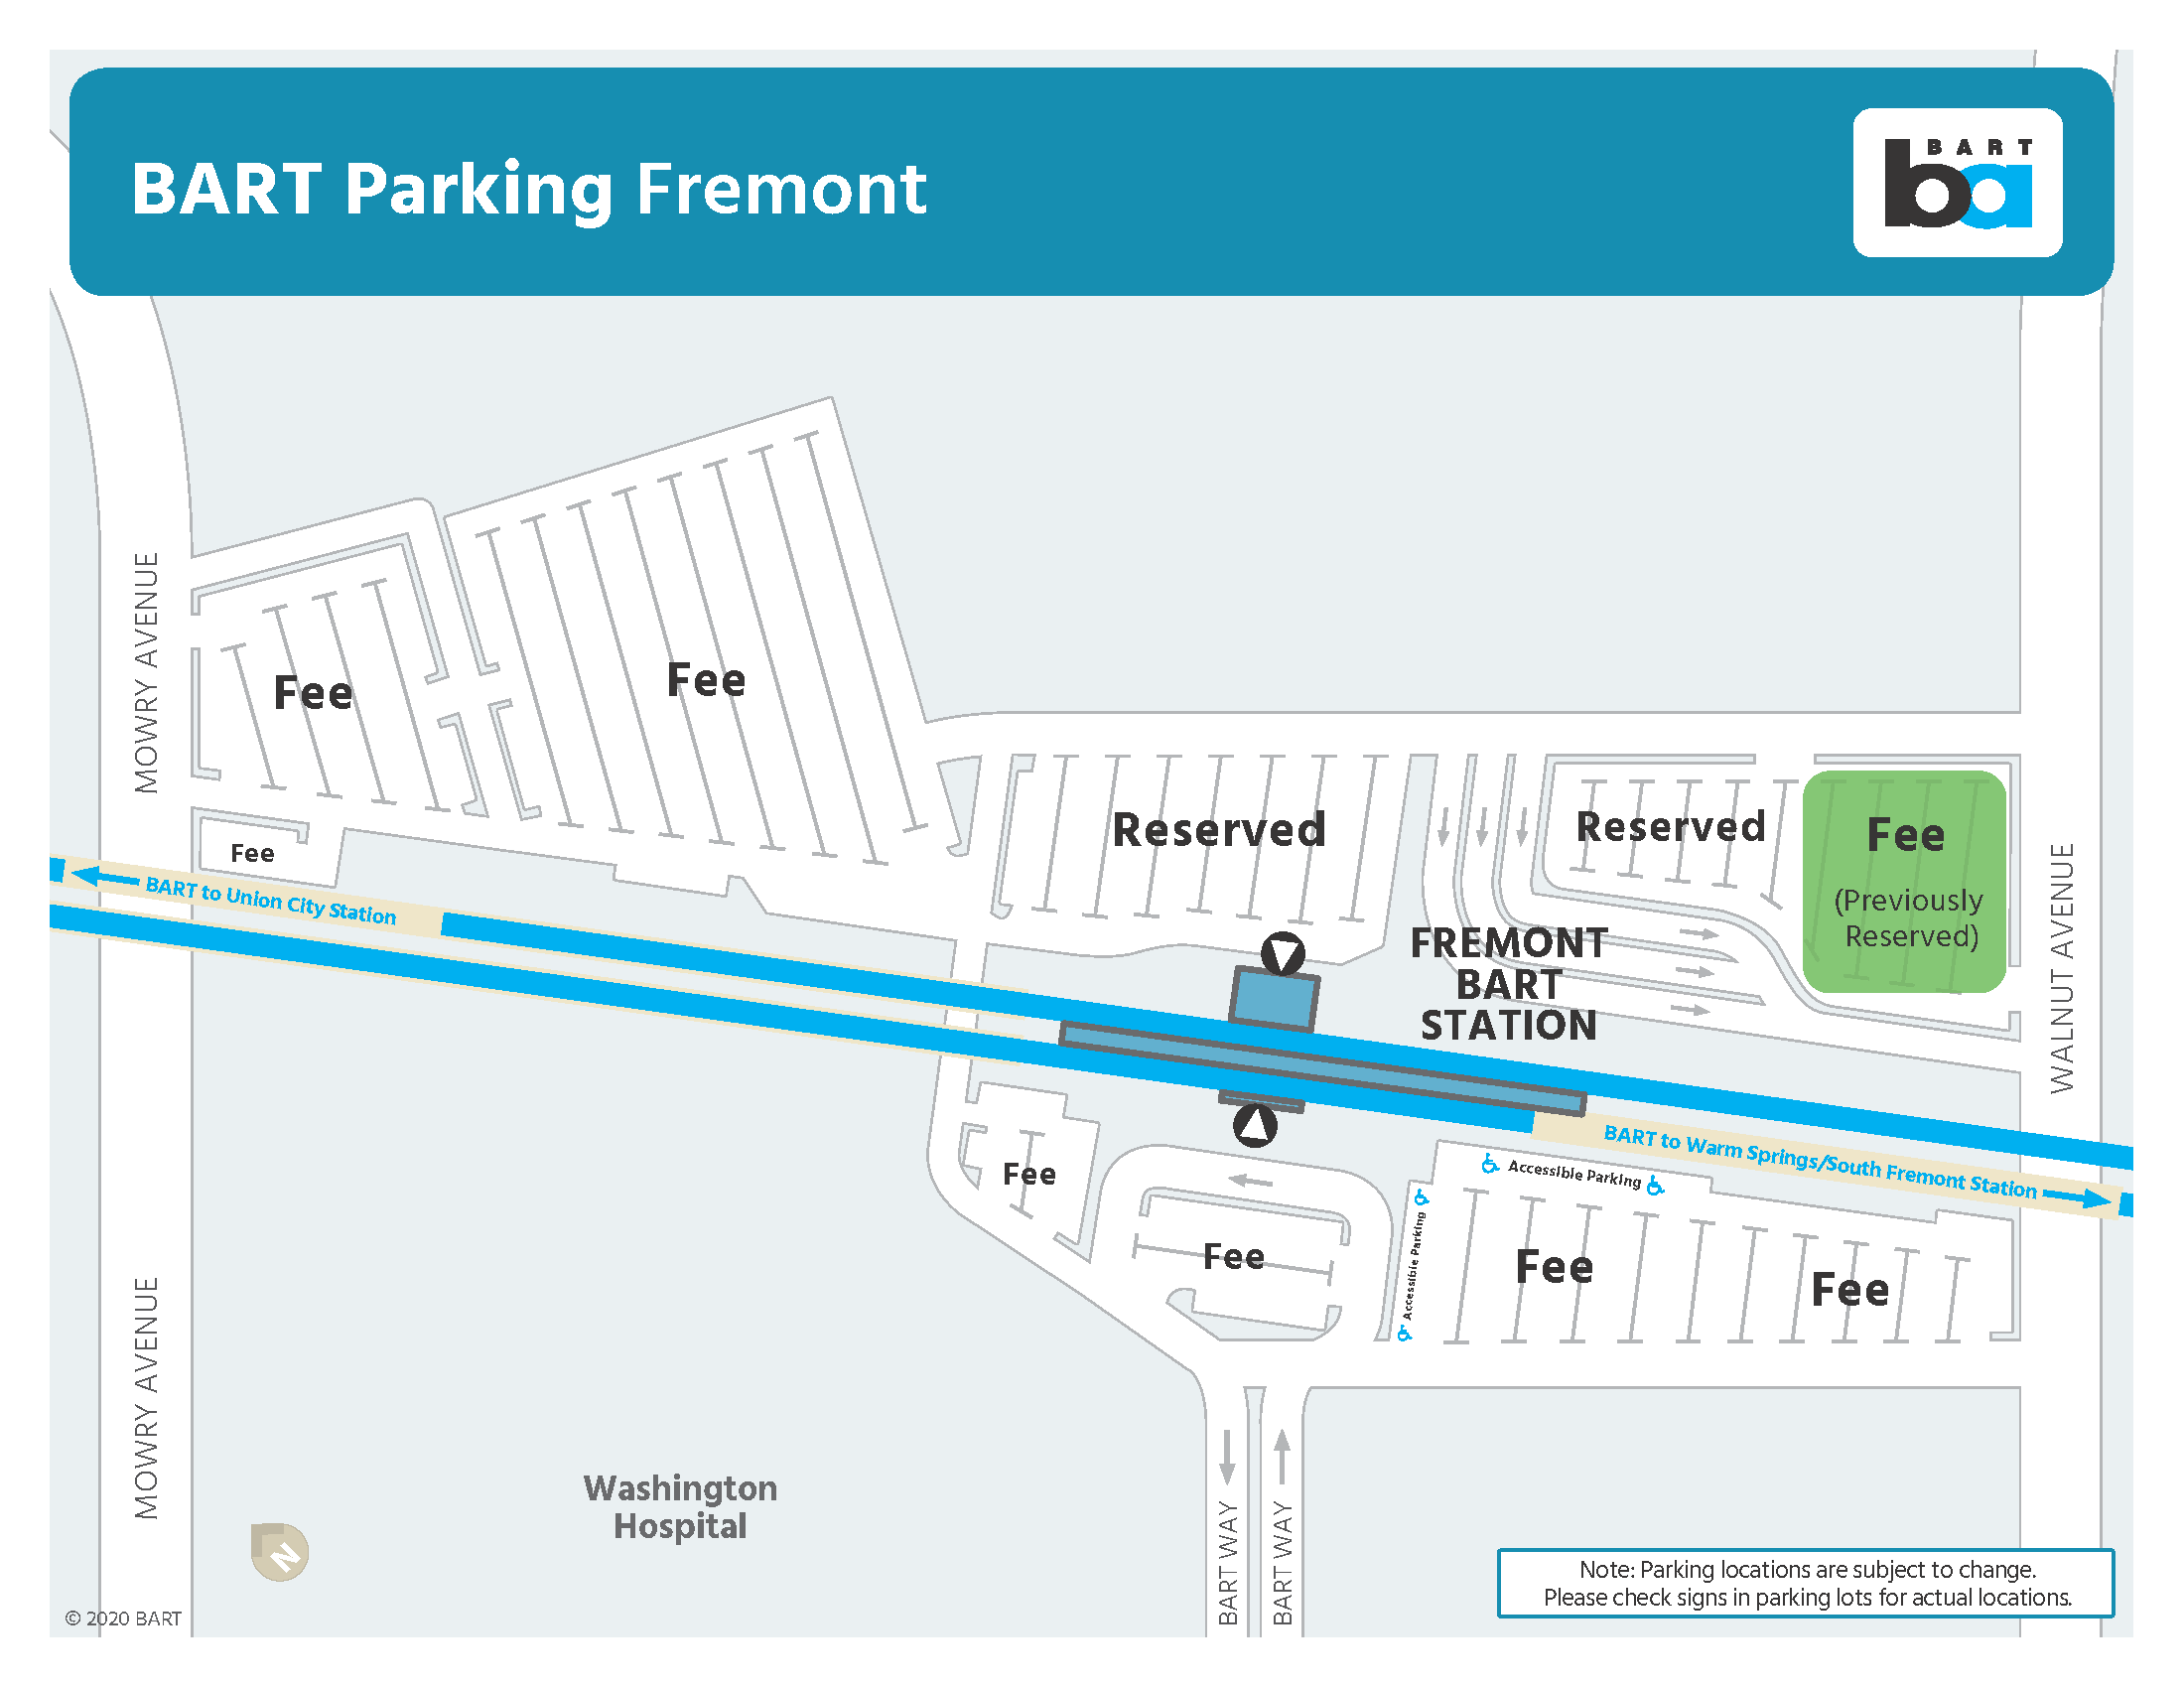 Parking areas at Fremont Station being reconfigured